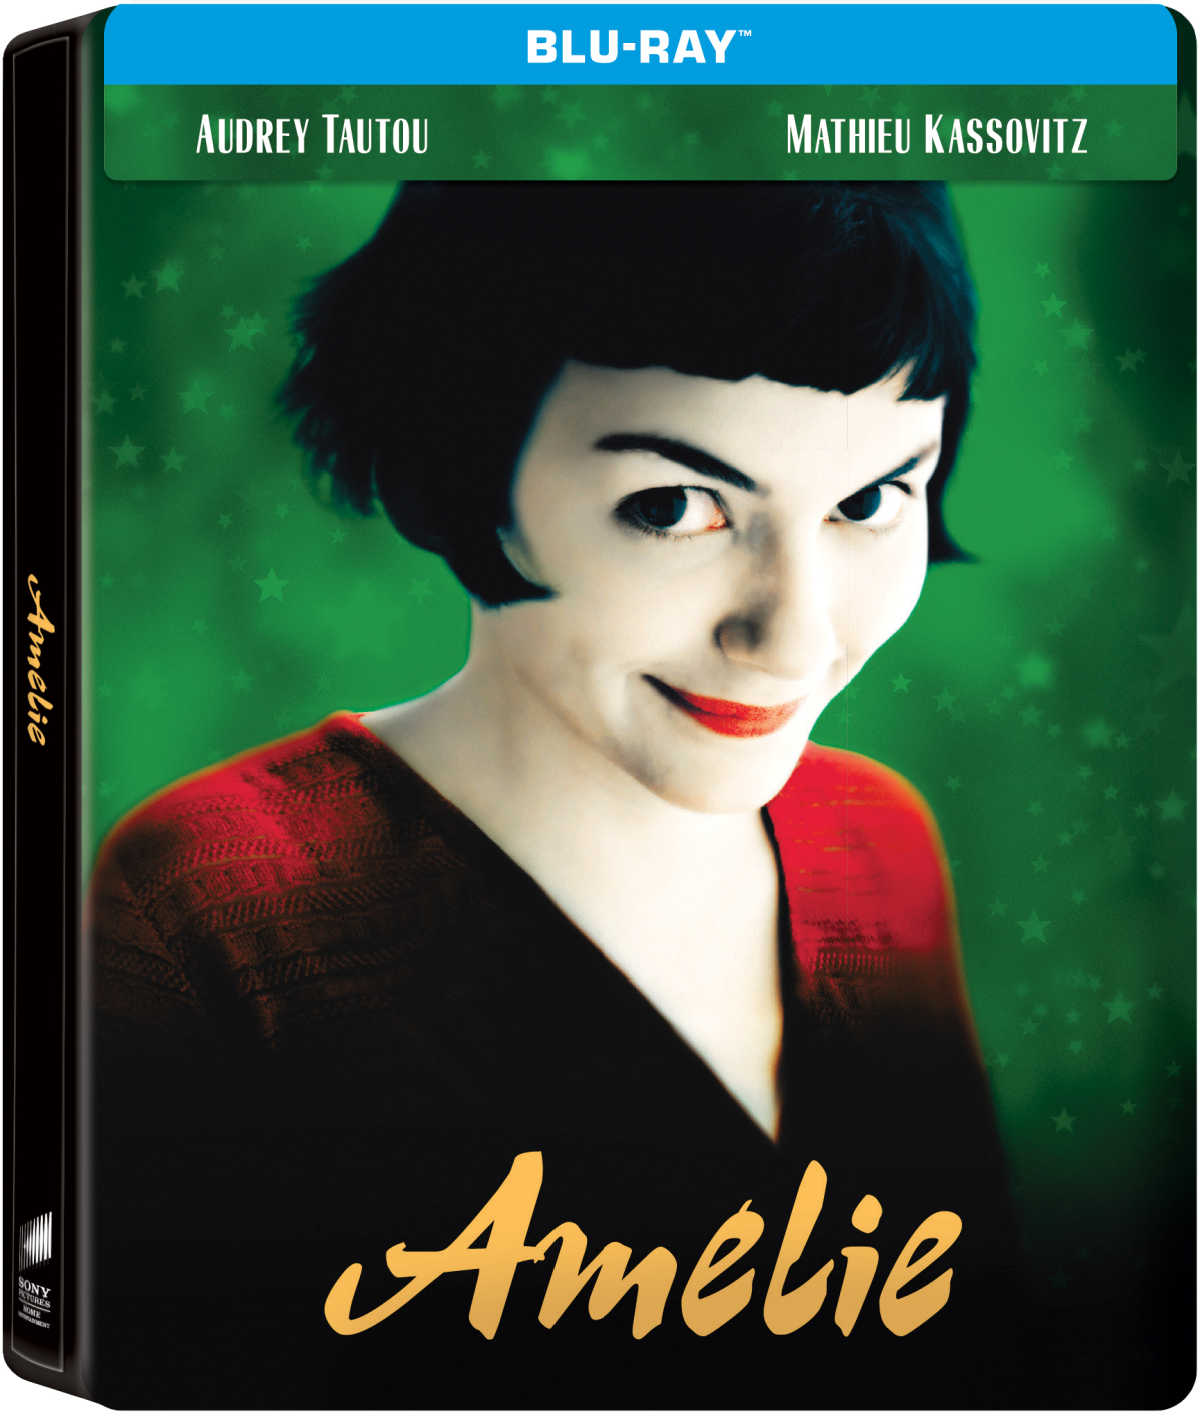 Experience the whimsical world of Amelie like never before with the stunning new SteelBook edition! Filled with heartwarming moments and quirky characters, this unforgettable film is a must-have for your Blu-Ray collection.